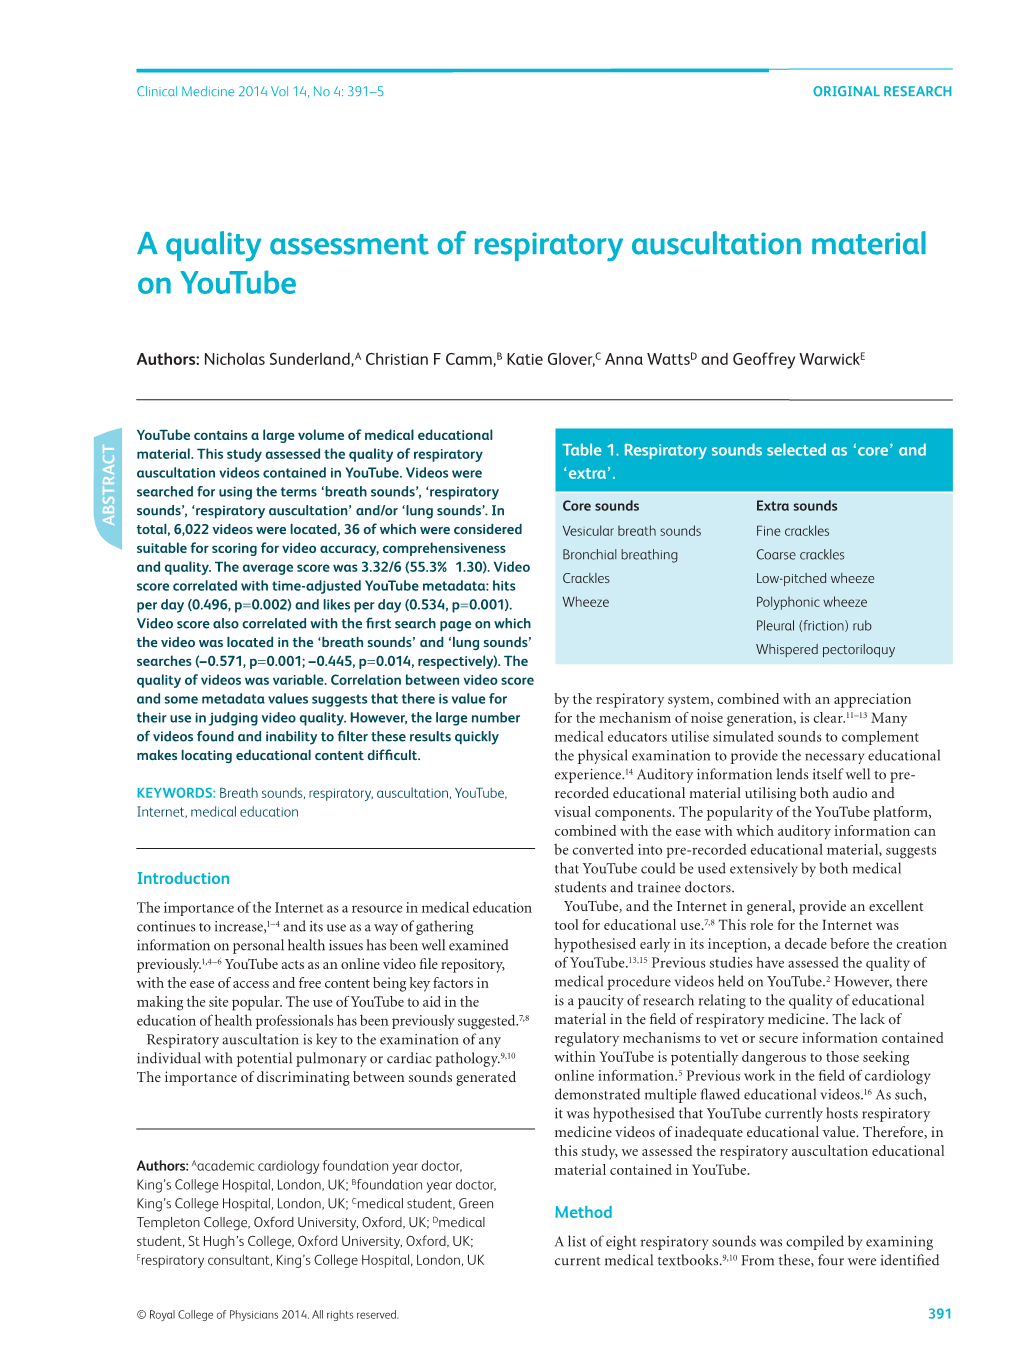 A Quality Assessment of Respiratory Auscultation Material on Youtube